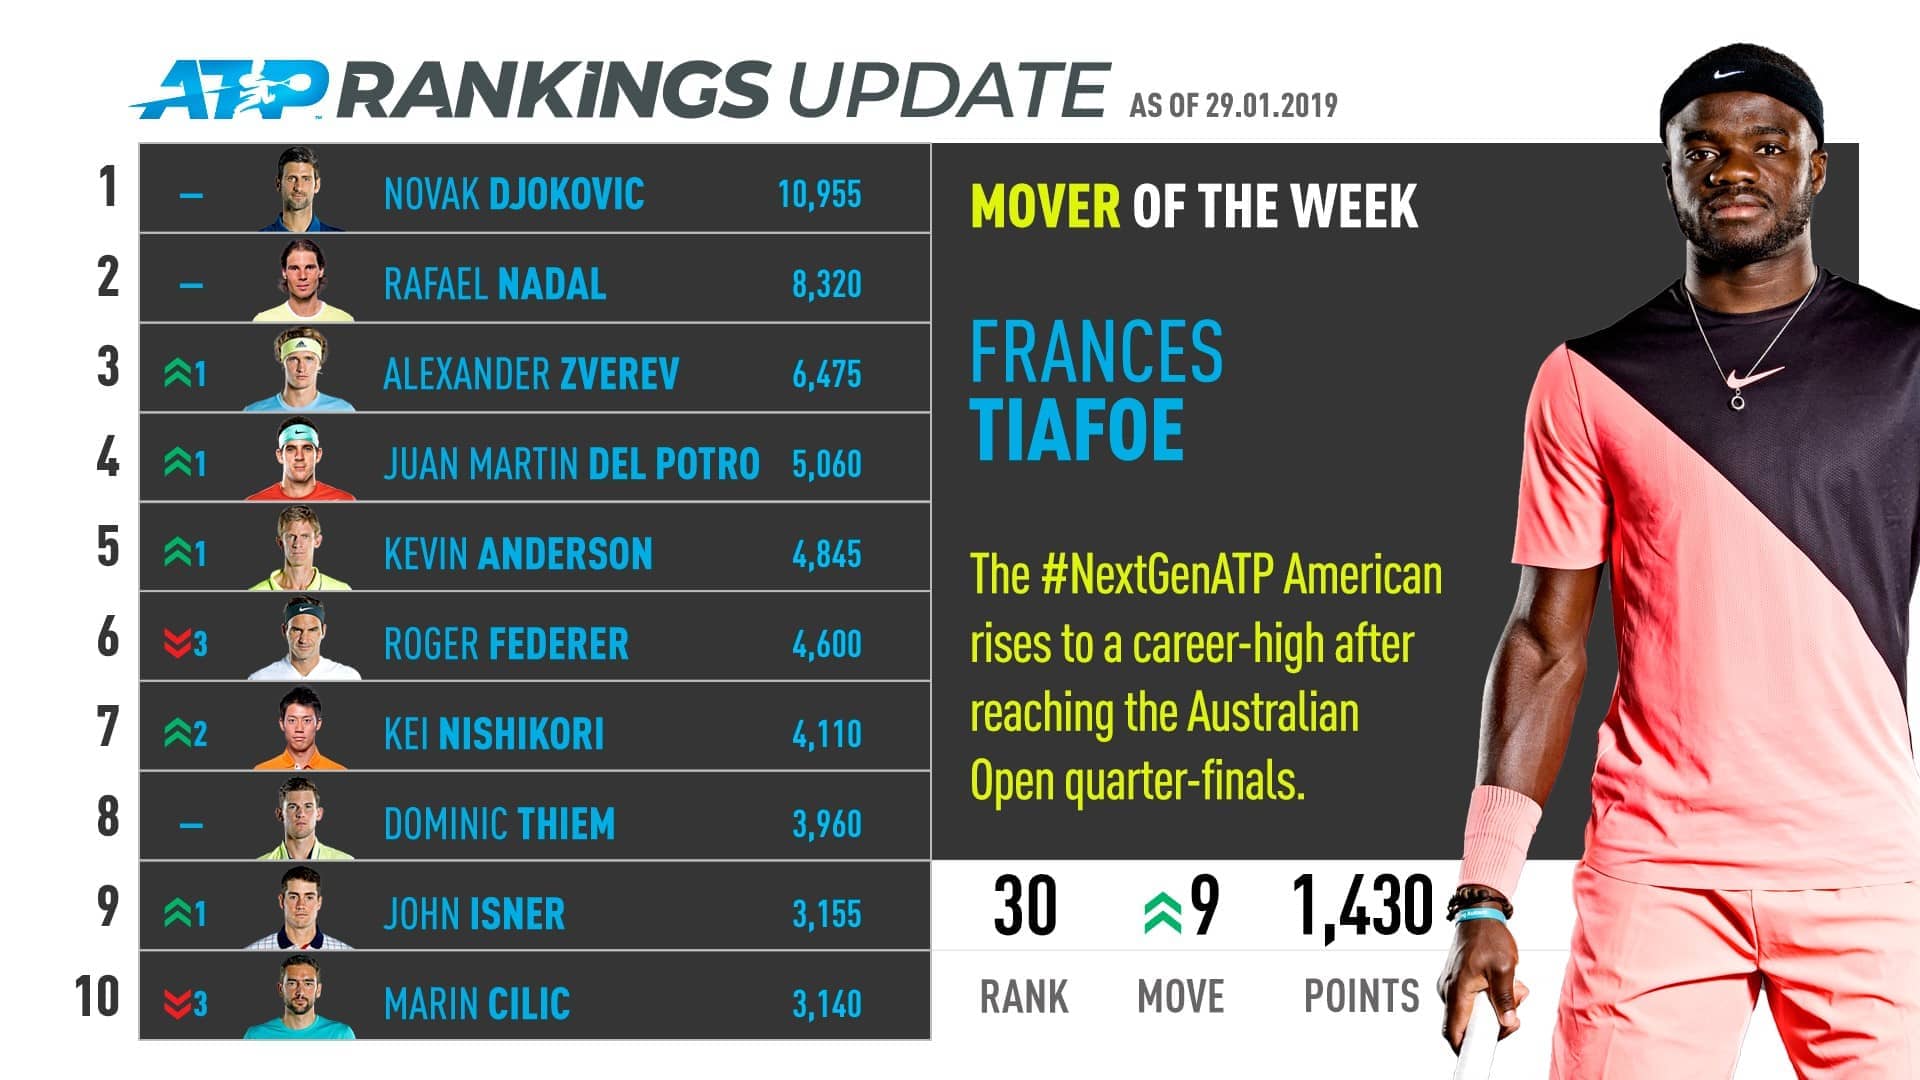 Frances Tiafoe Moves To Career-High, Mover Of The Week | Next Gen ATP Finals1920 x 1080